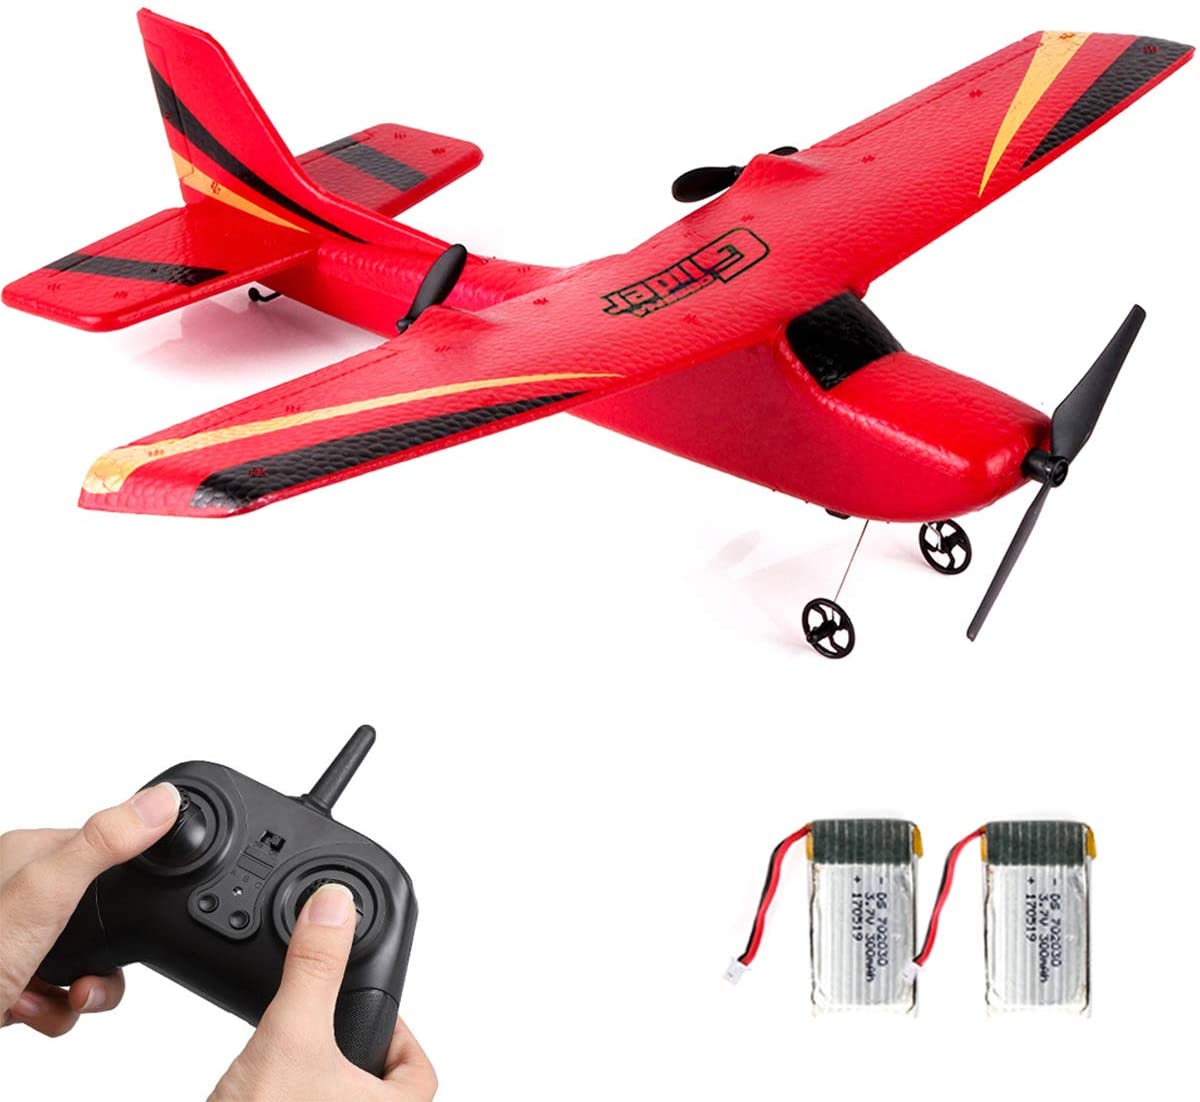 Durable EPP Foam RC Aircraft for Adults and Beginner Ready to Fly Remote Control Plane RTF Yellow 6 Axis Rc Gyro Beginner Remote Control Airplane BongoJoy RC Plane for Kids 